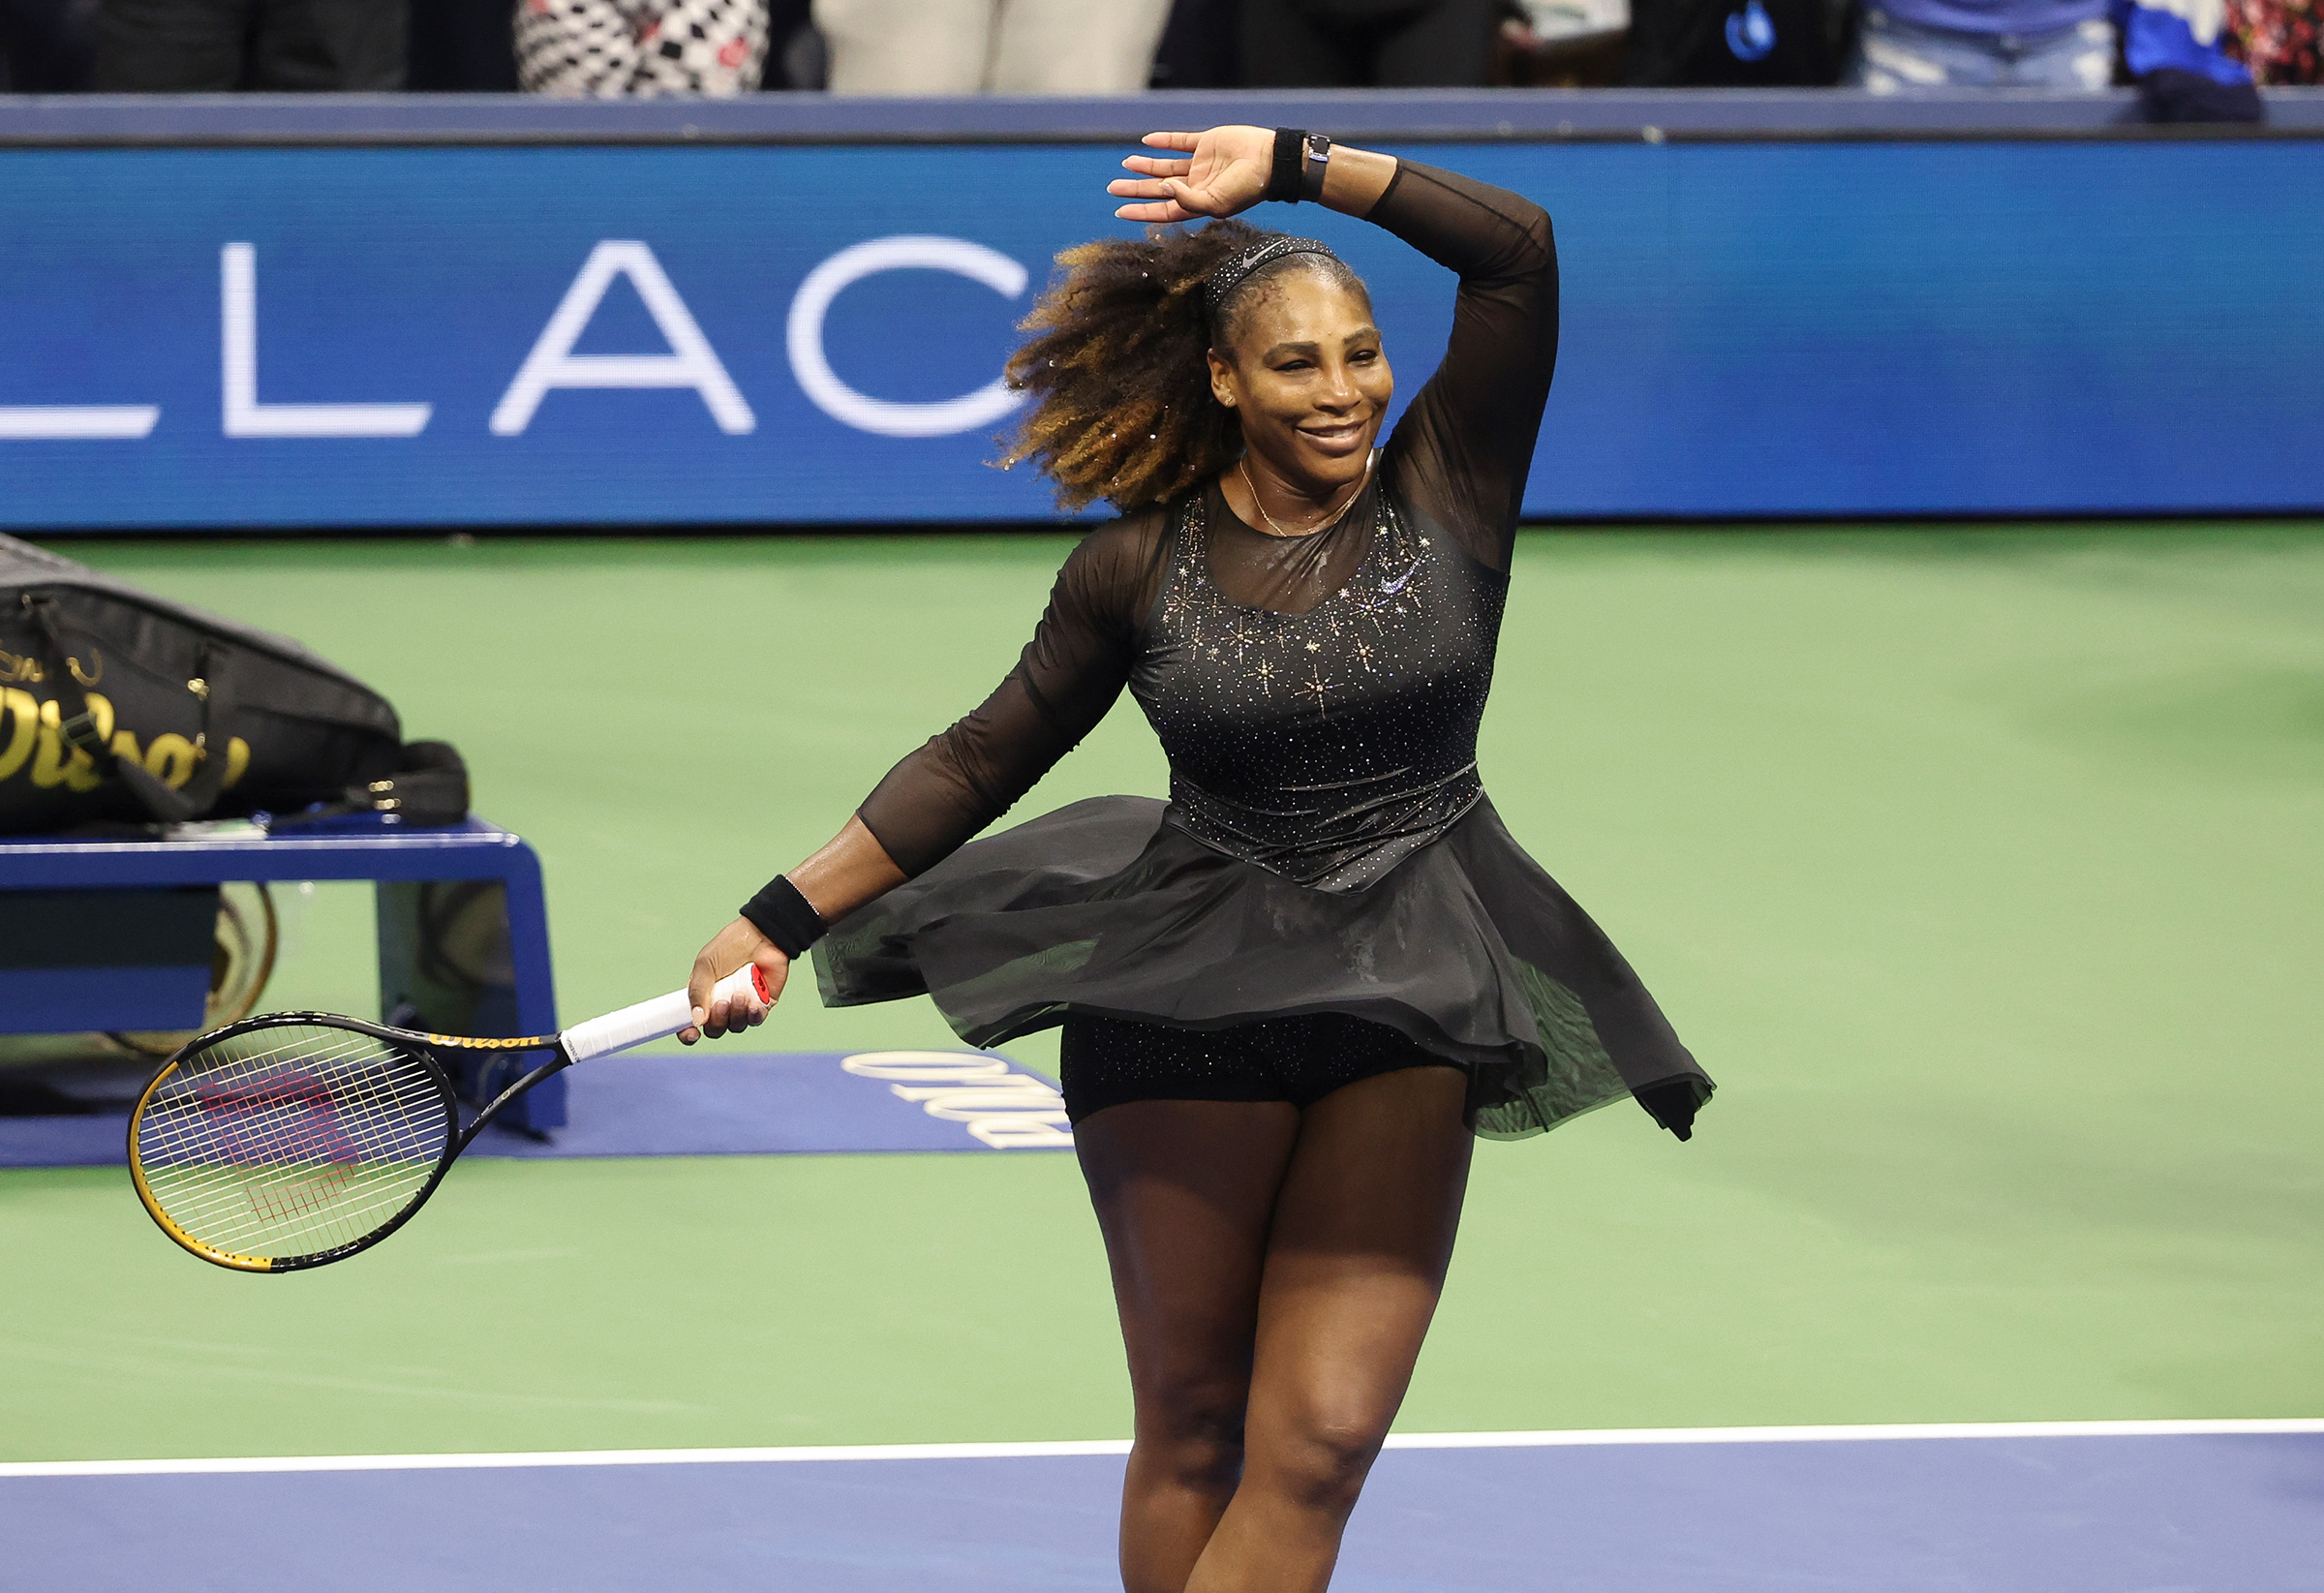 Serena Williams celebrates her first round victory during day 1 of the US Open 2022, at the USTA Billie Jean King National Tennis Center in Queens, N.Y., on Aug. 29, 2022.